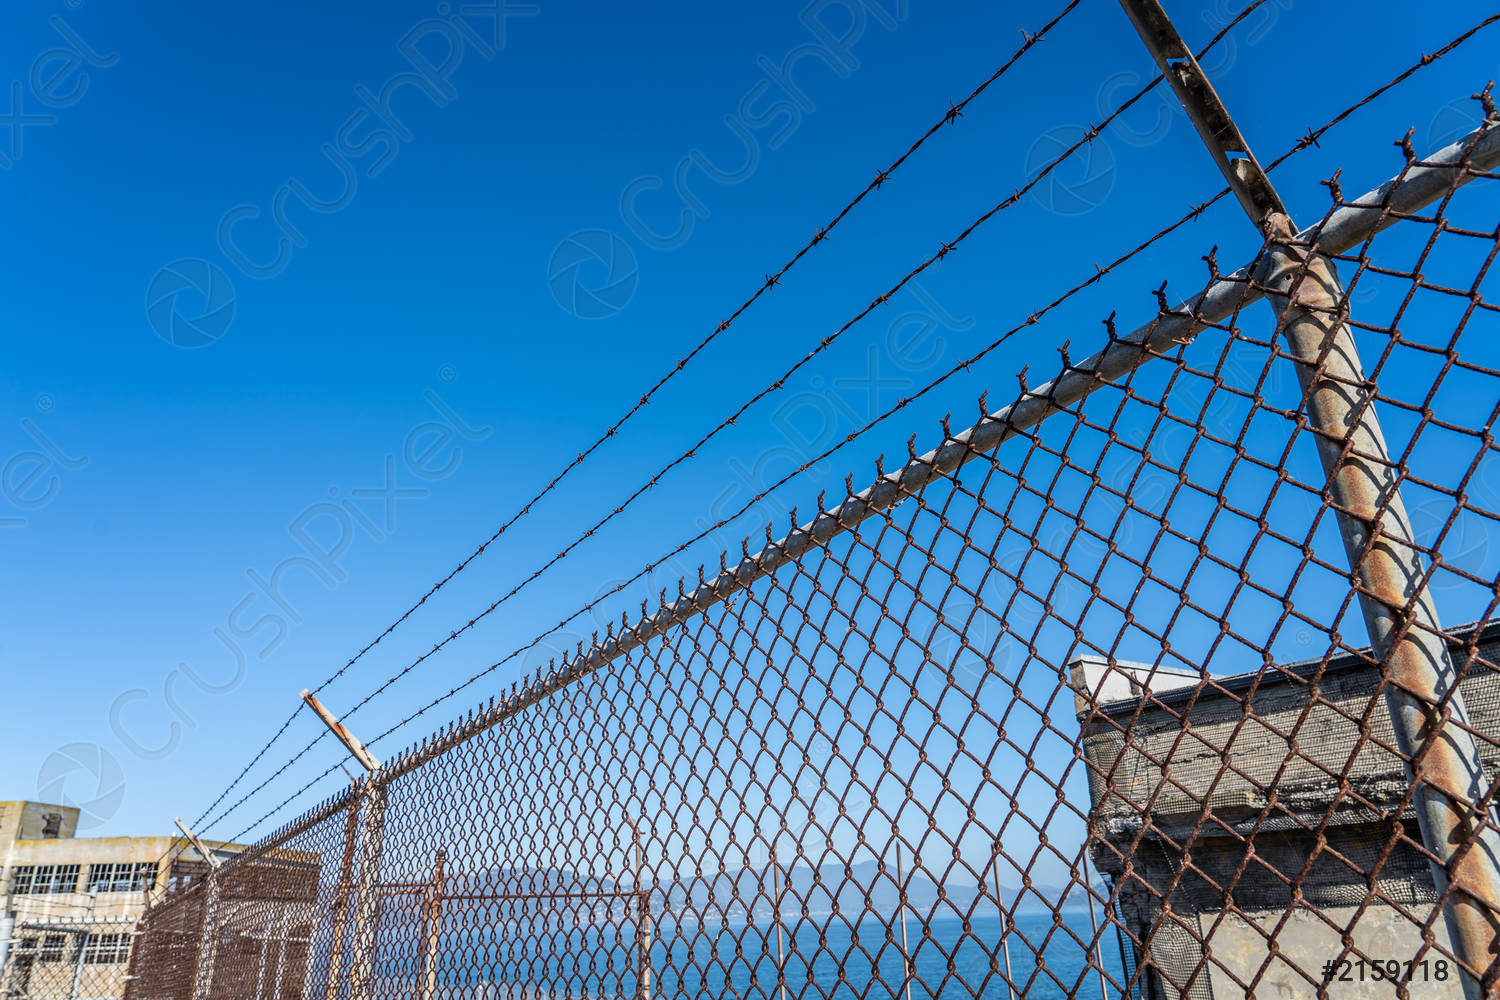 metal-fence-with-barbed-wire-2159118.jpg